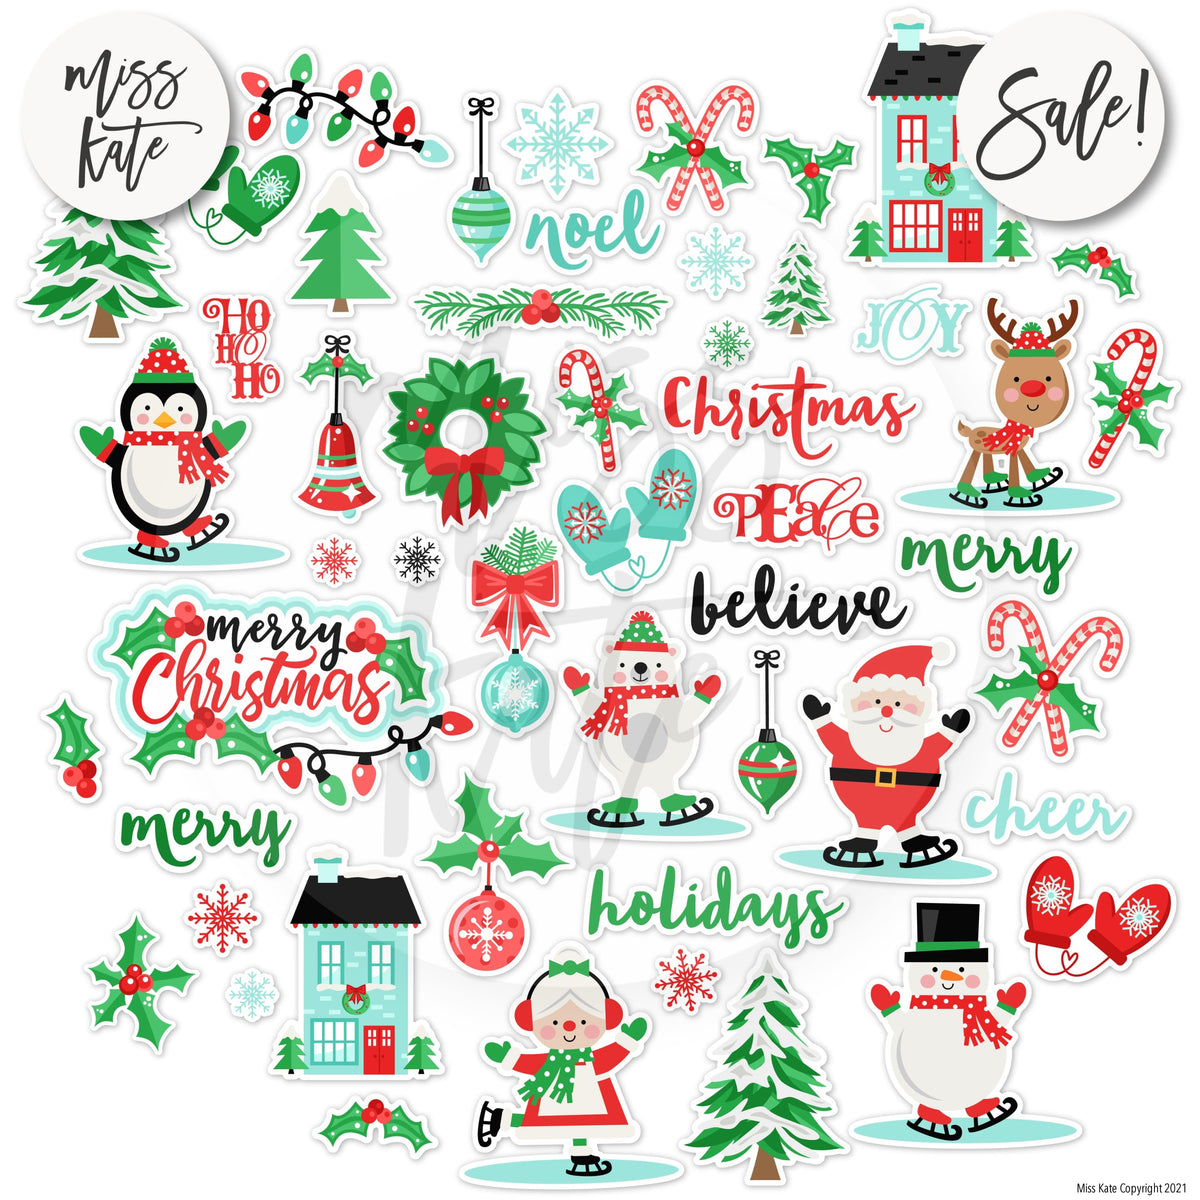 Christmas Eve - Sticker Sheet Stickers Christmas, planner – MISS KATE